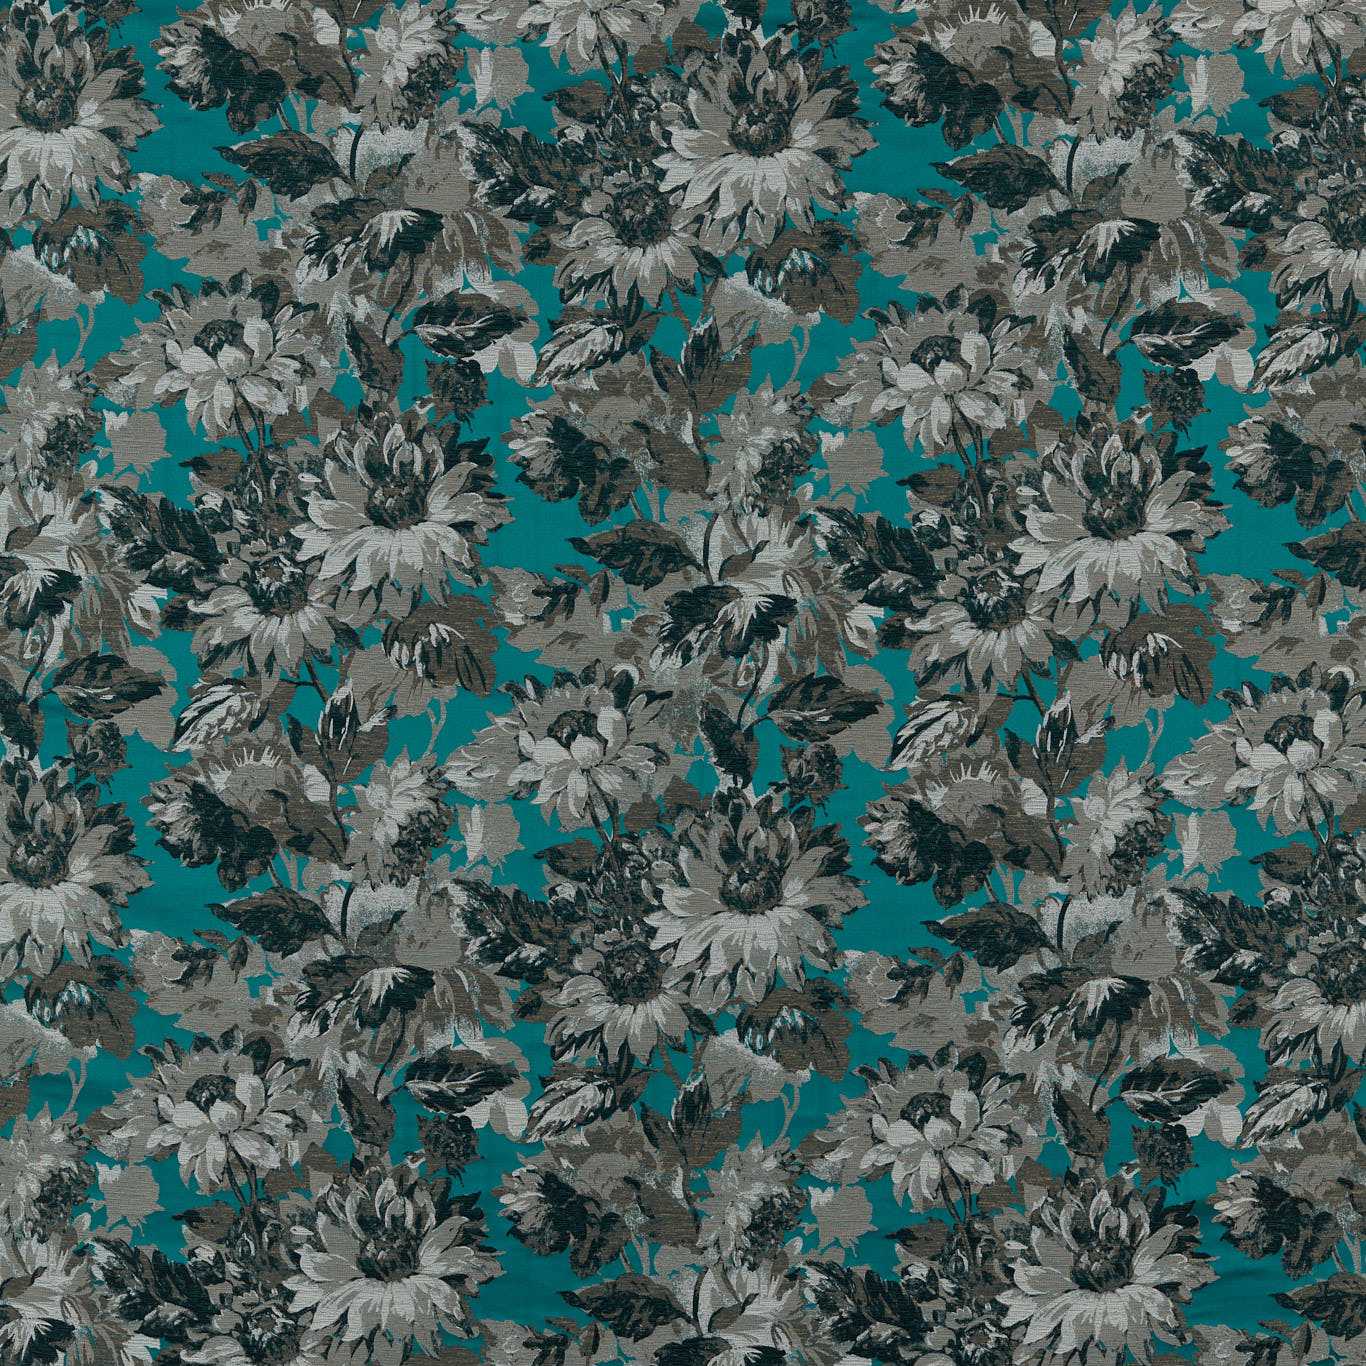 Sunforest Peacock Fabric by CNC